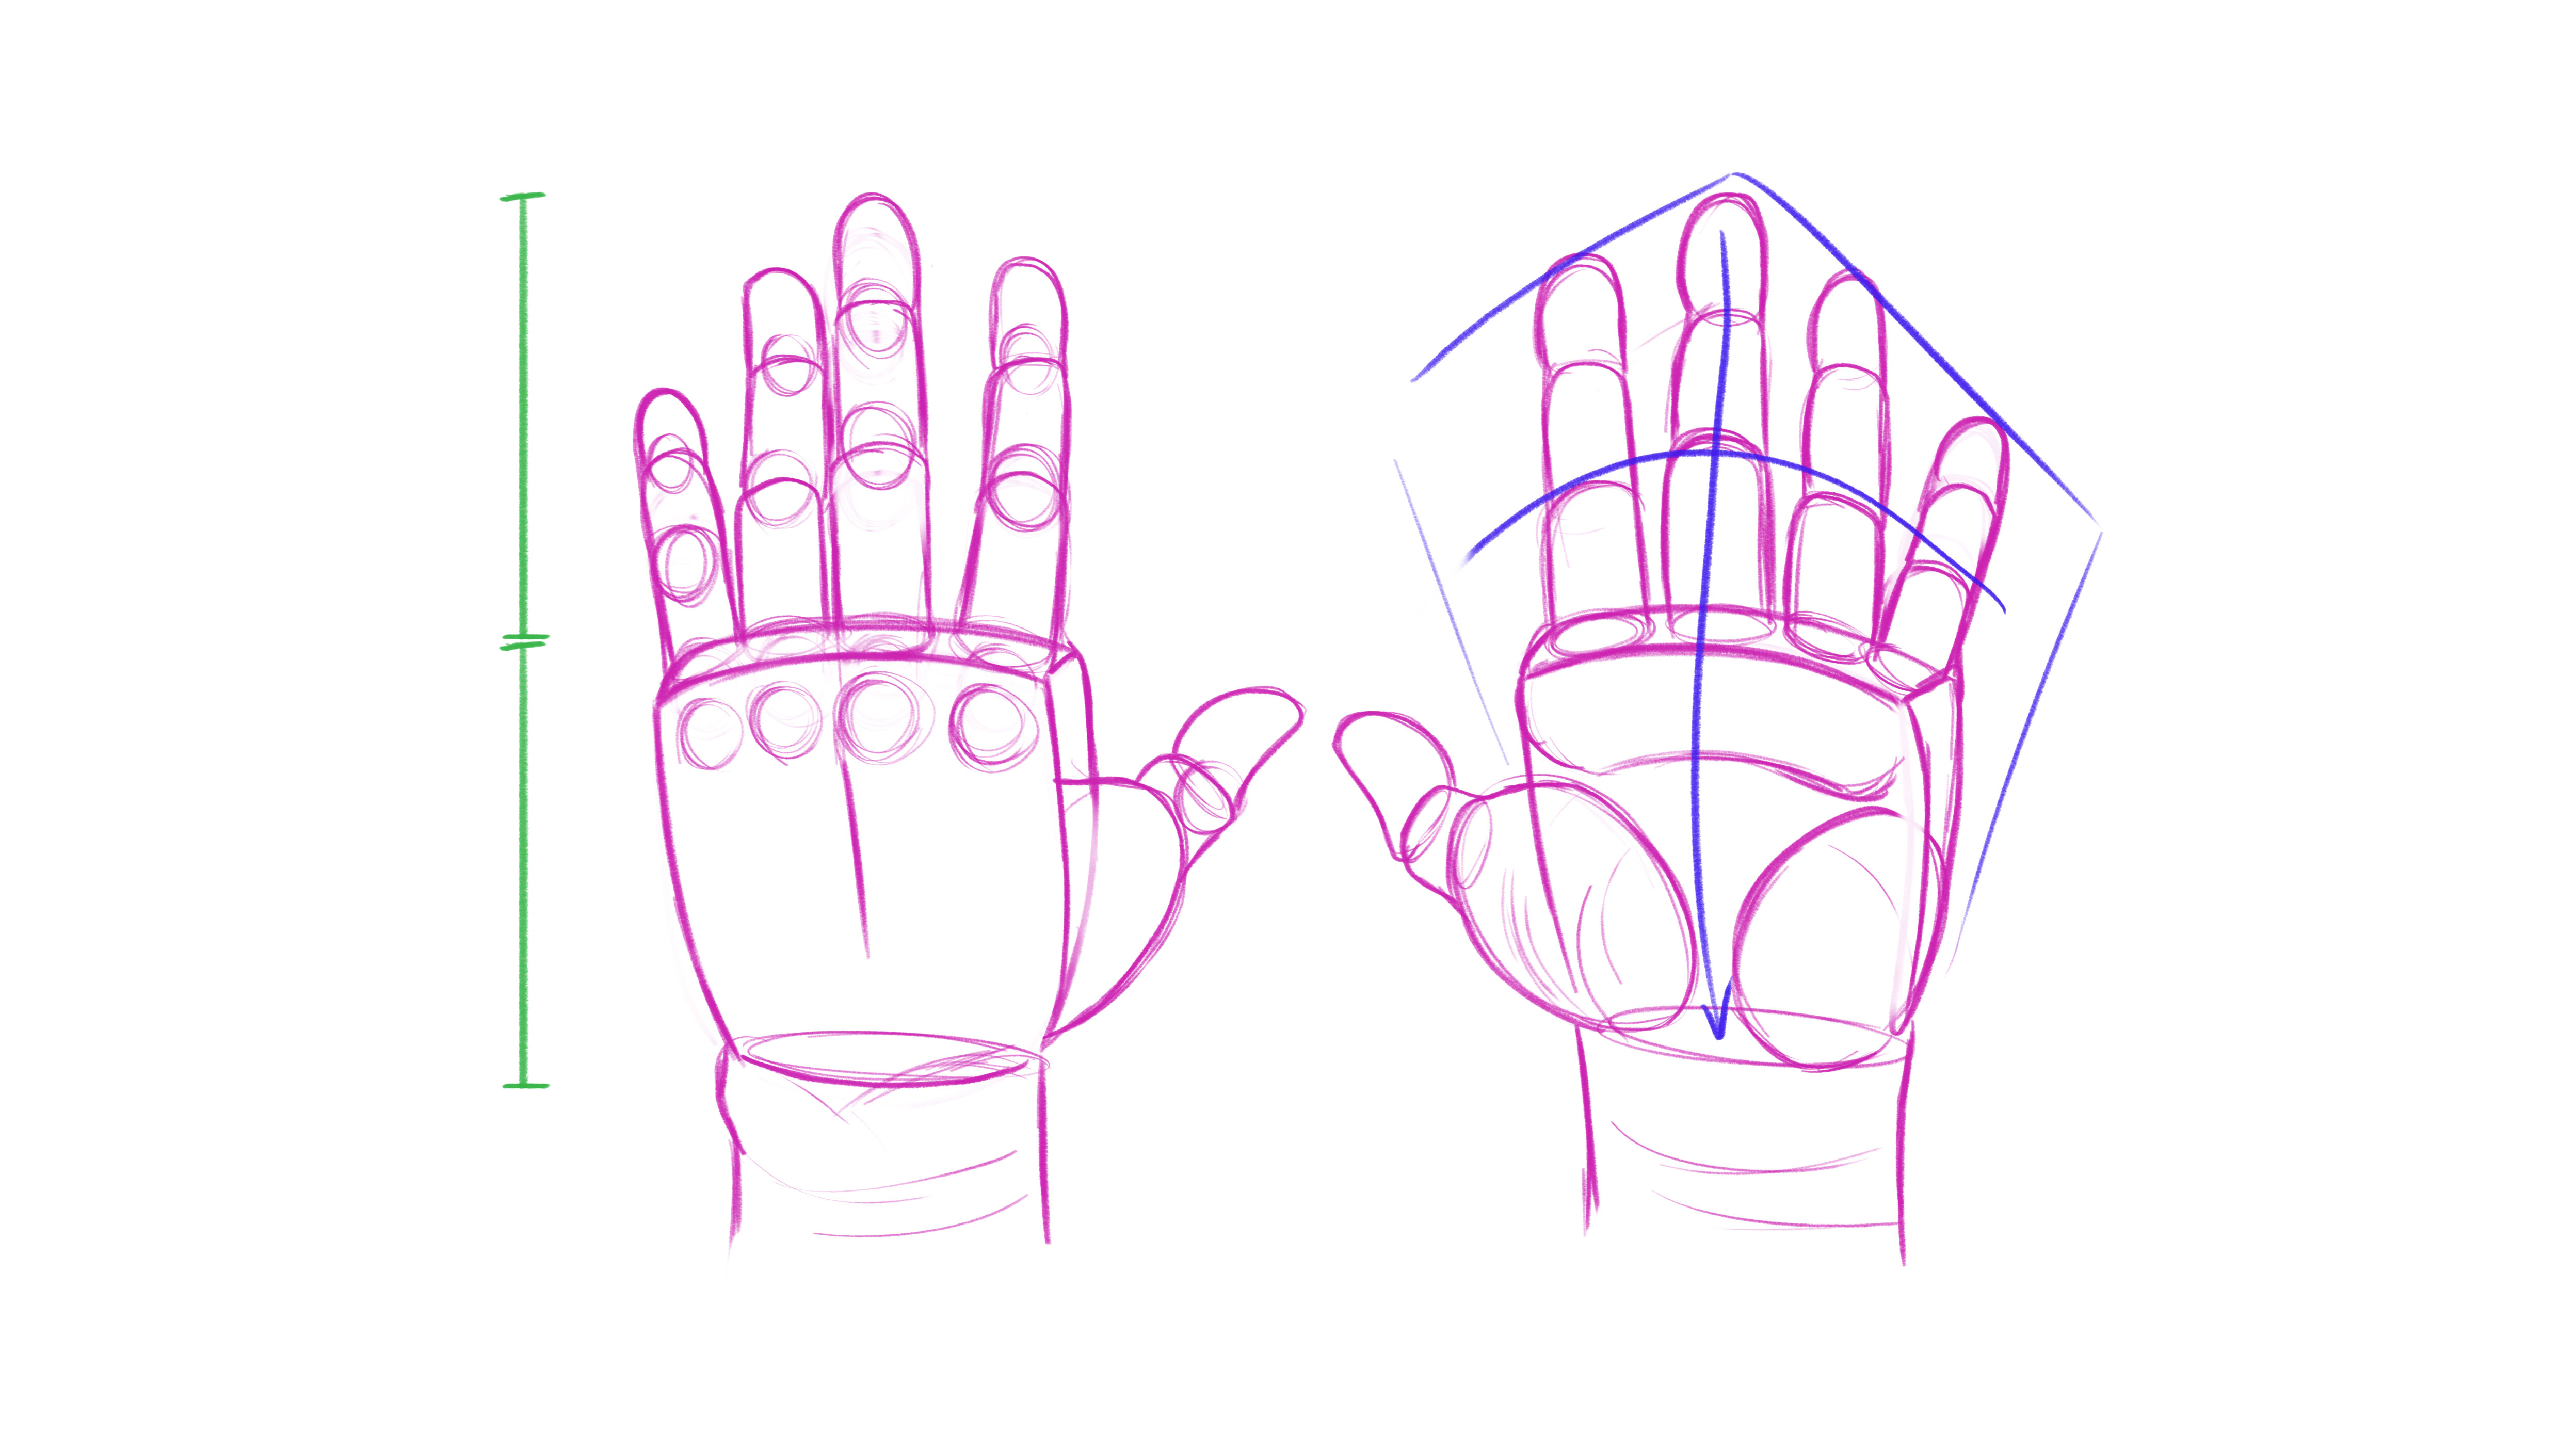 How to draw hands: sketch of hand with fingers in proportion